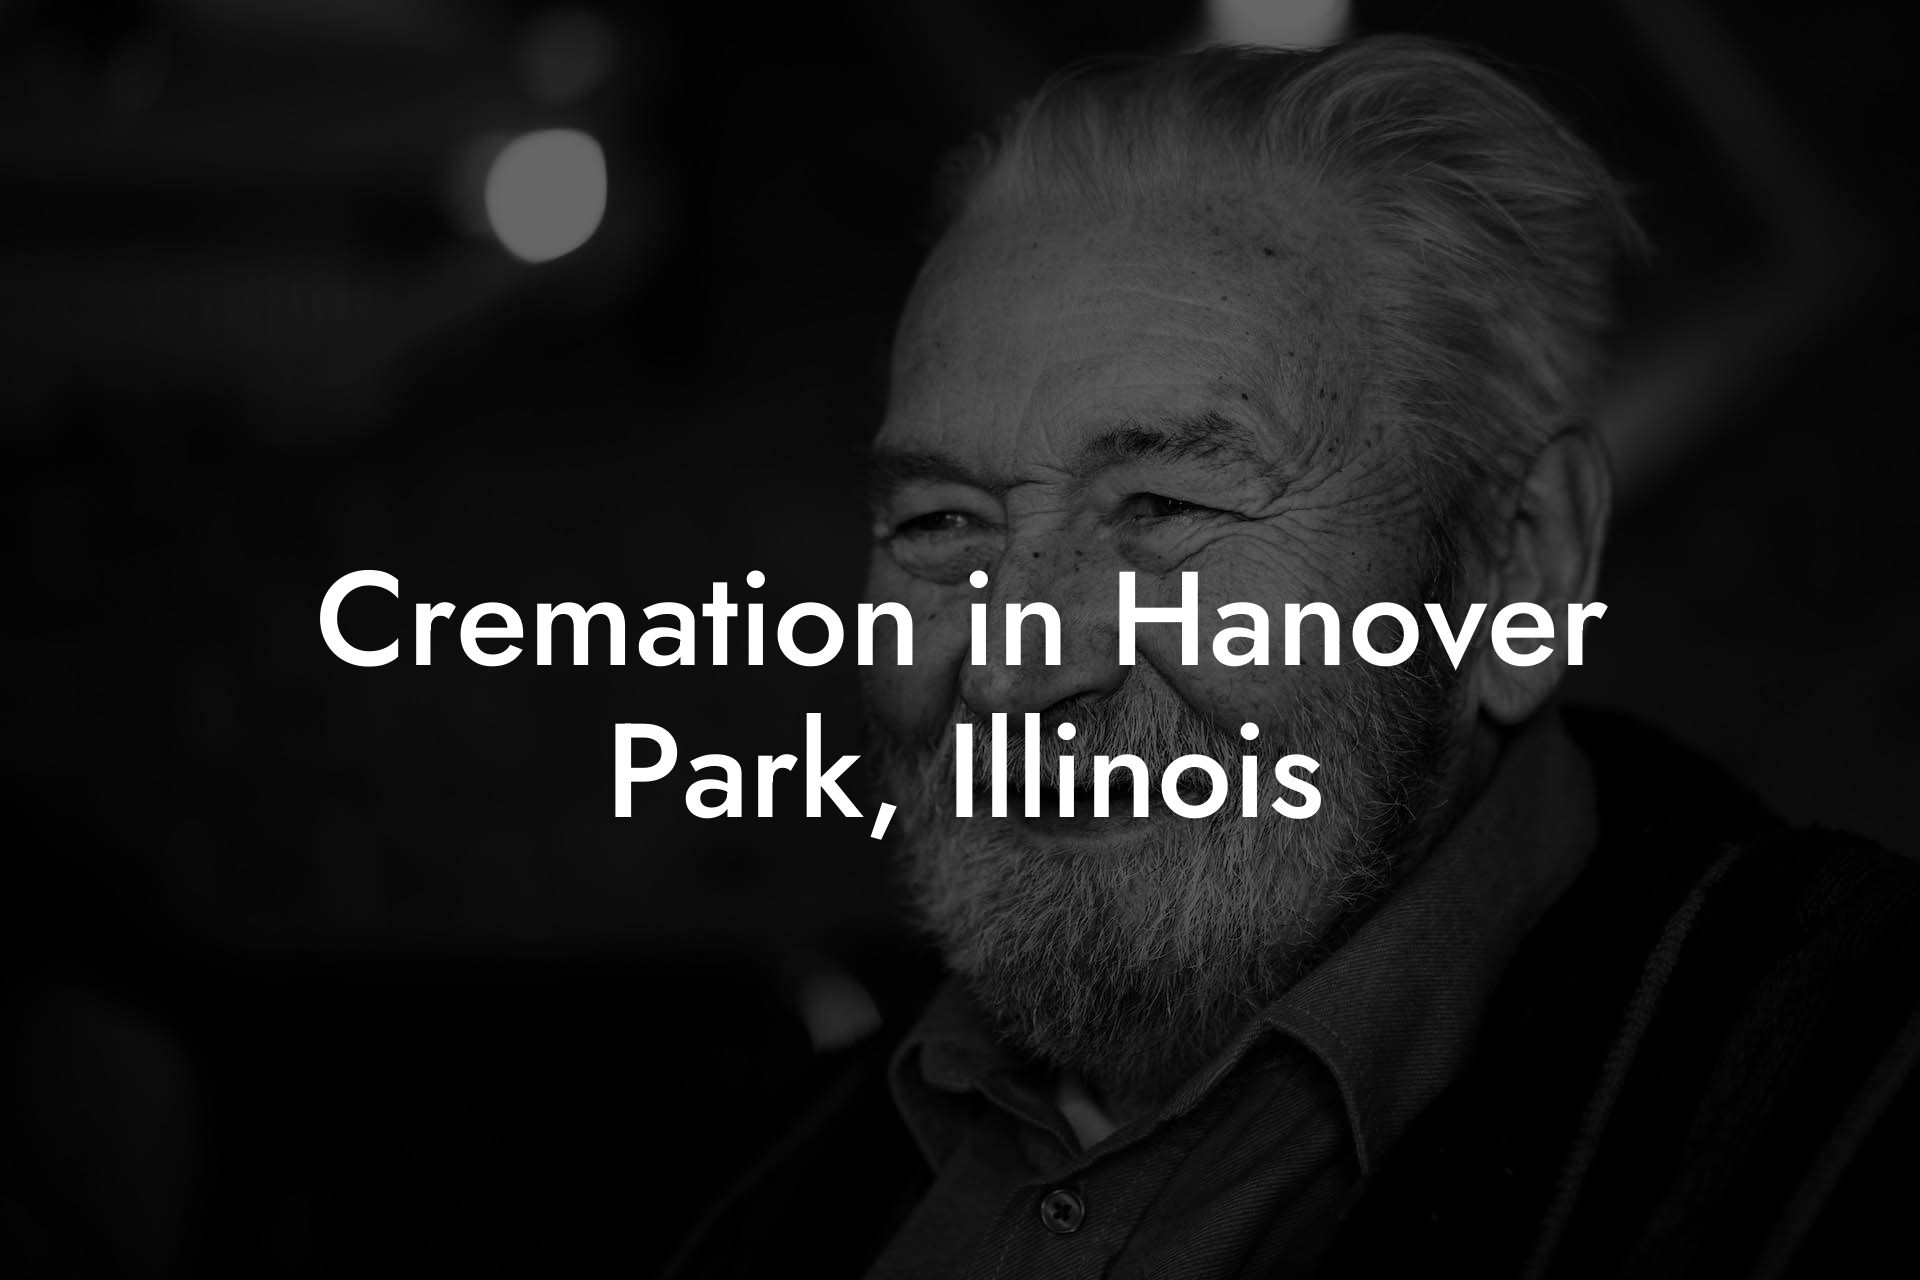 Cremation in Hanover Park, Illinois